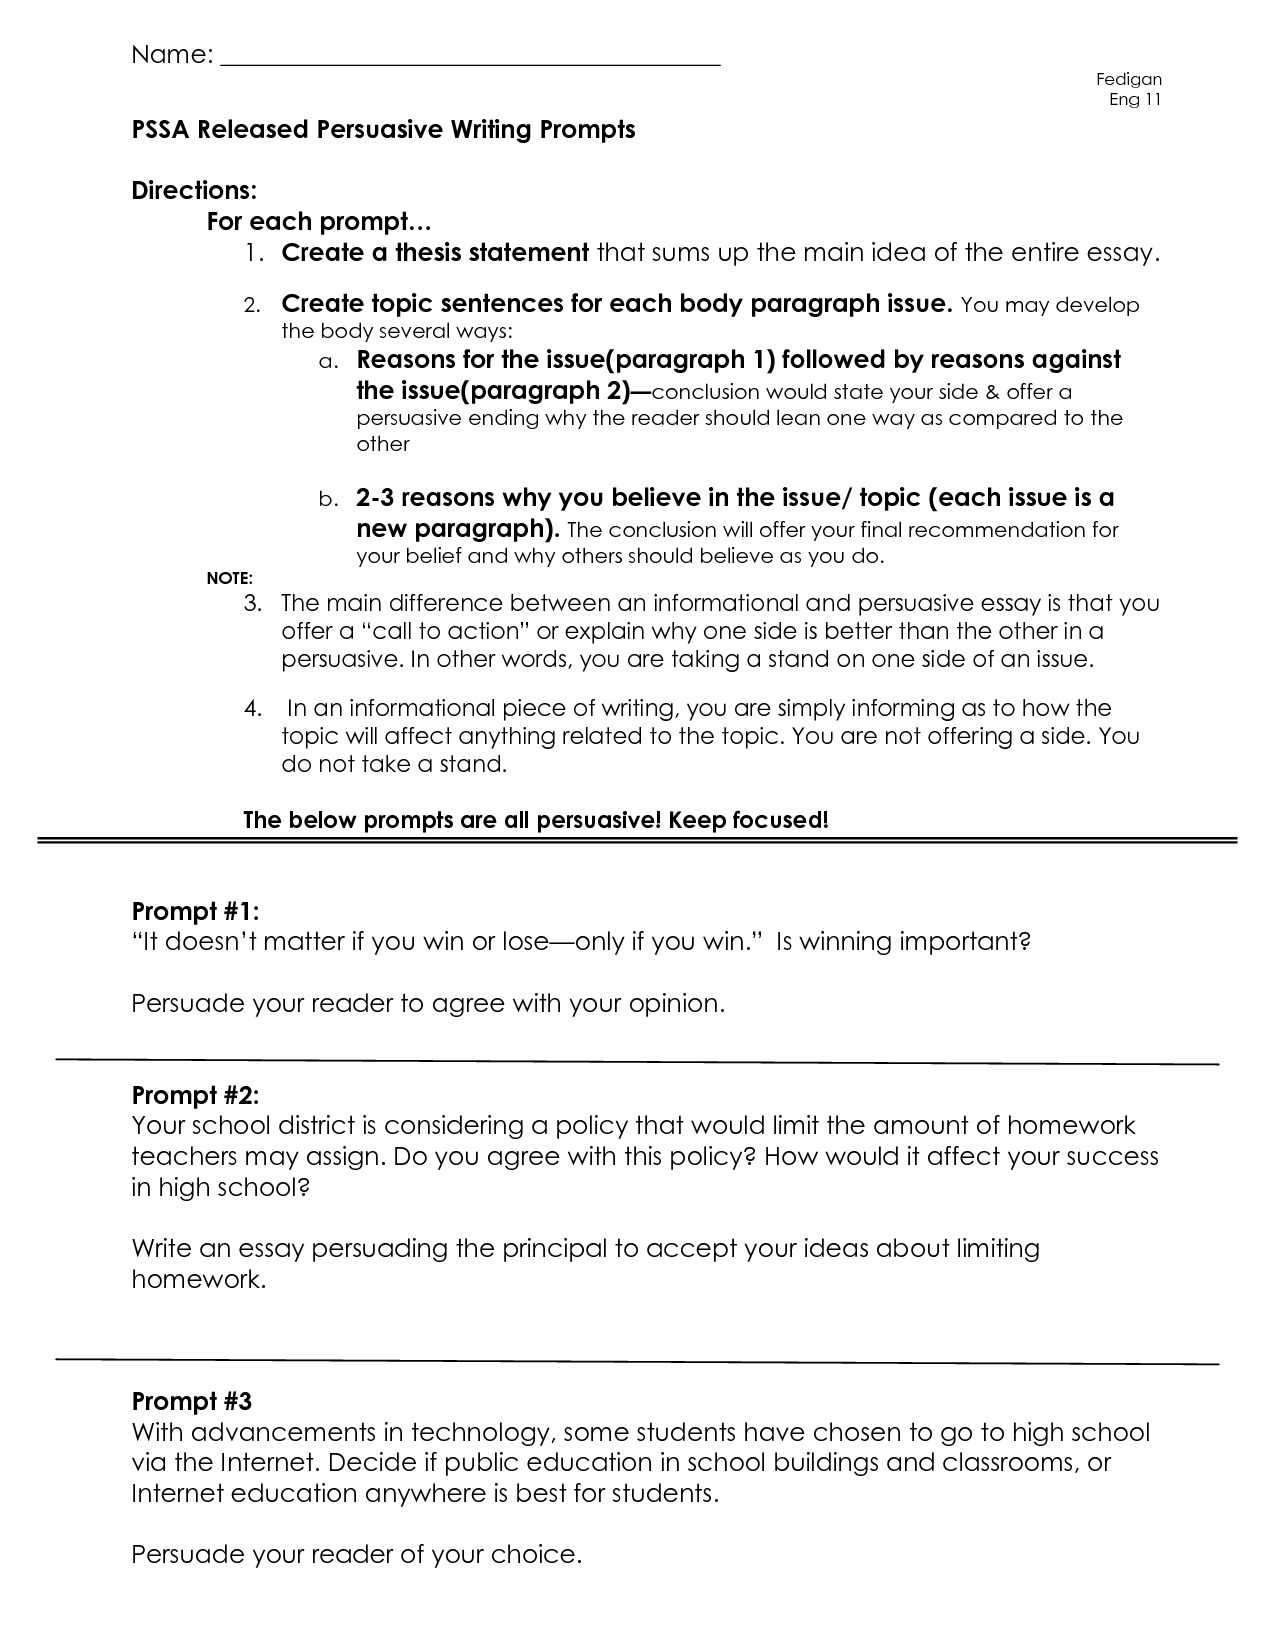 georgia 5th grade writing assessment practice prompts for nbpts